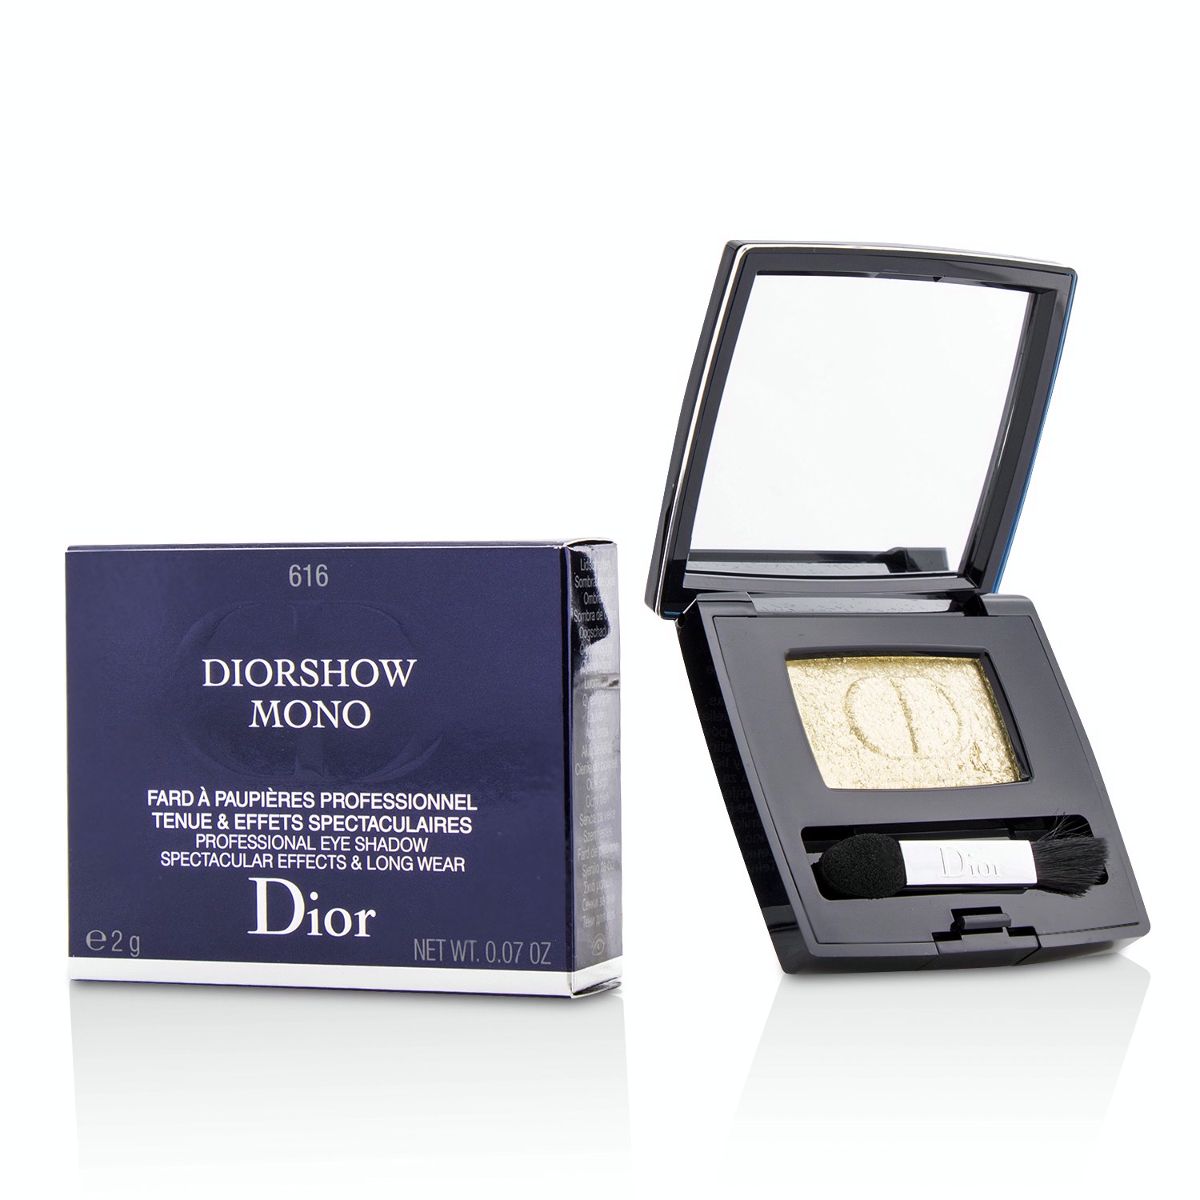 Diorshow Mono Professional Spectacular Effects  Long Wear Eyeshadow - # 616 Pulse Christian Dior Image